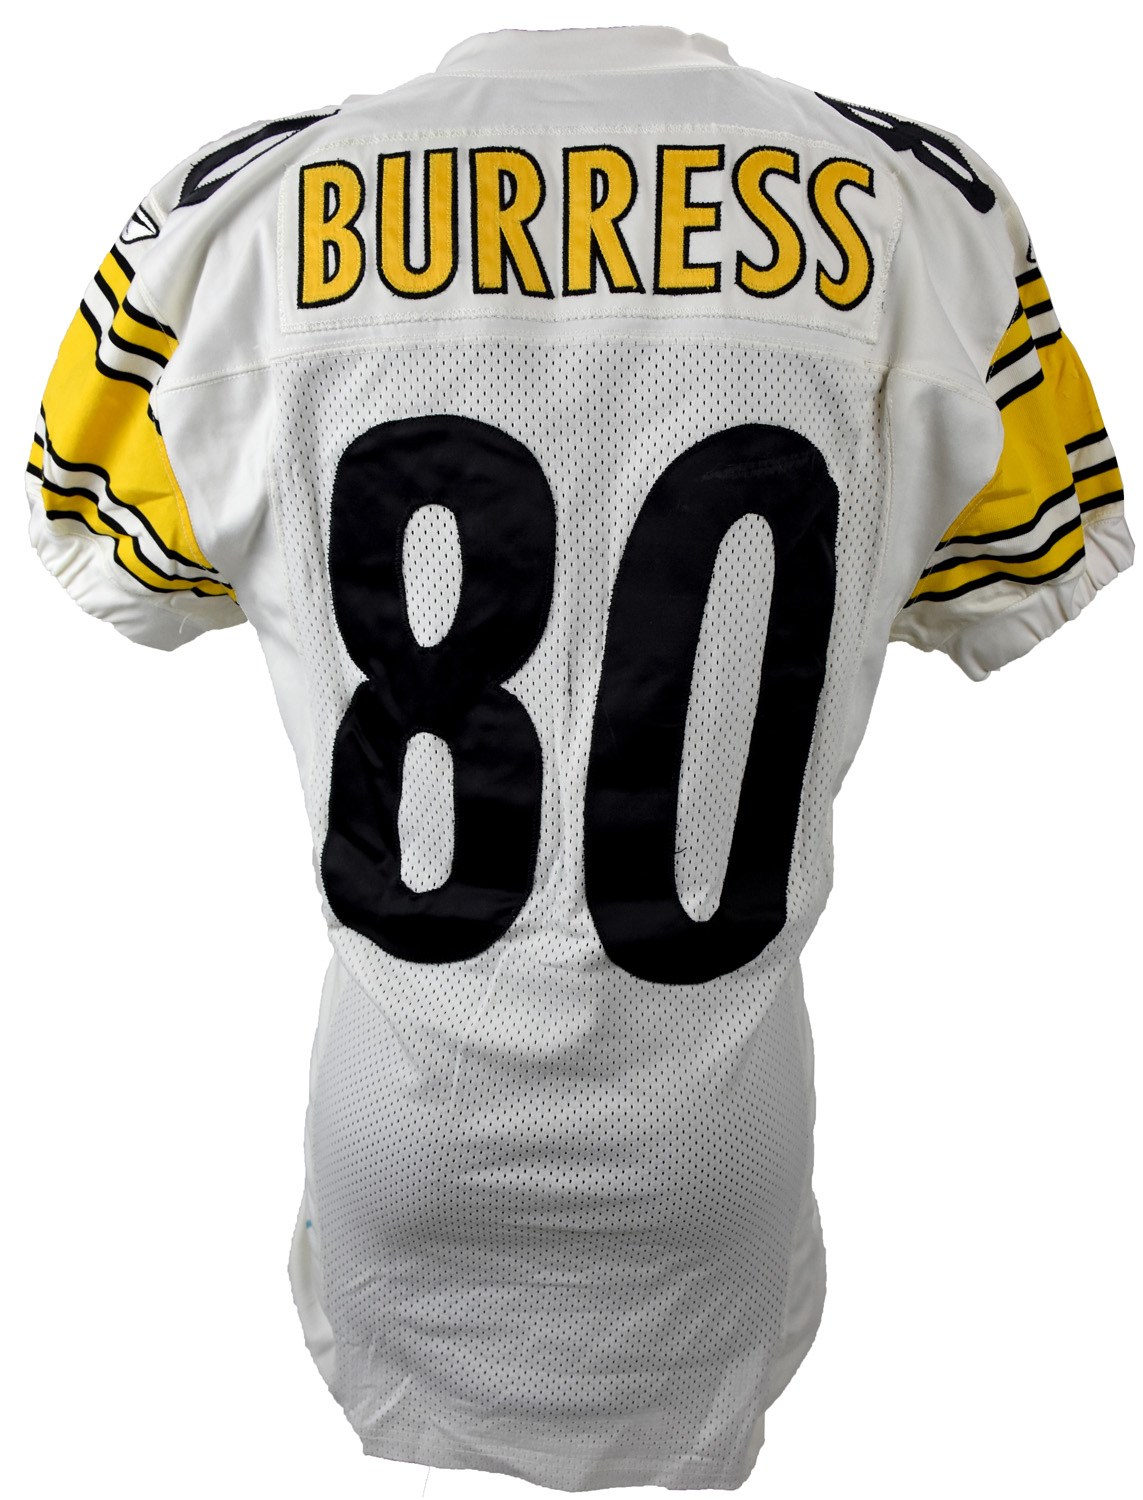 - 2002 Plaxico Burress Pittsburgh Steelers Game Worn Jersey - 2 TD Game - Photo-Matched to Multiple Games (Resolution Photomatching LOA)